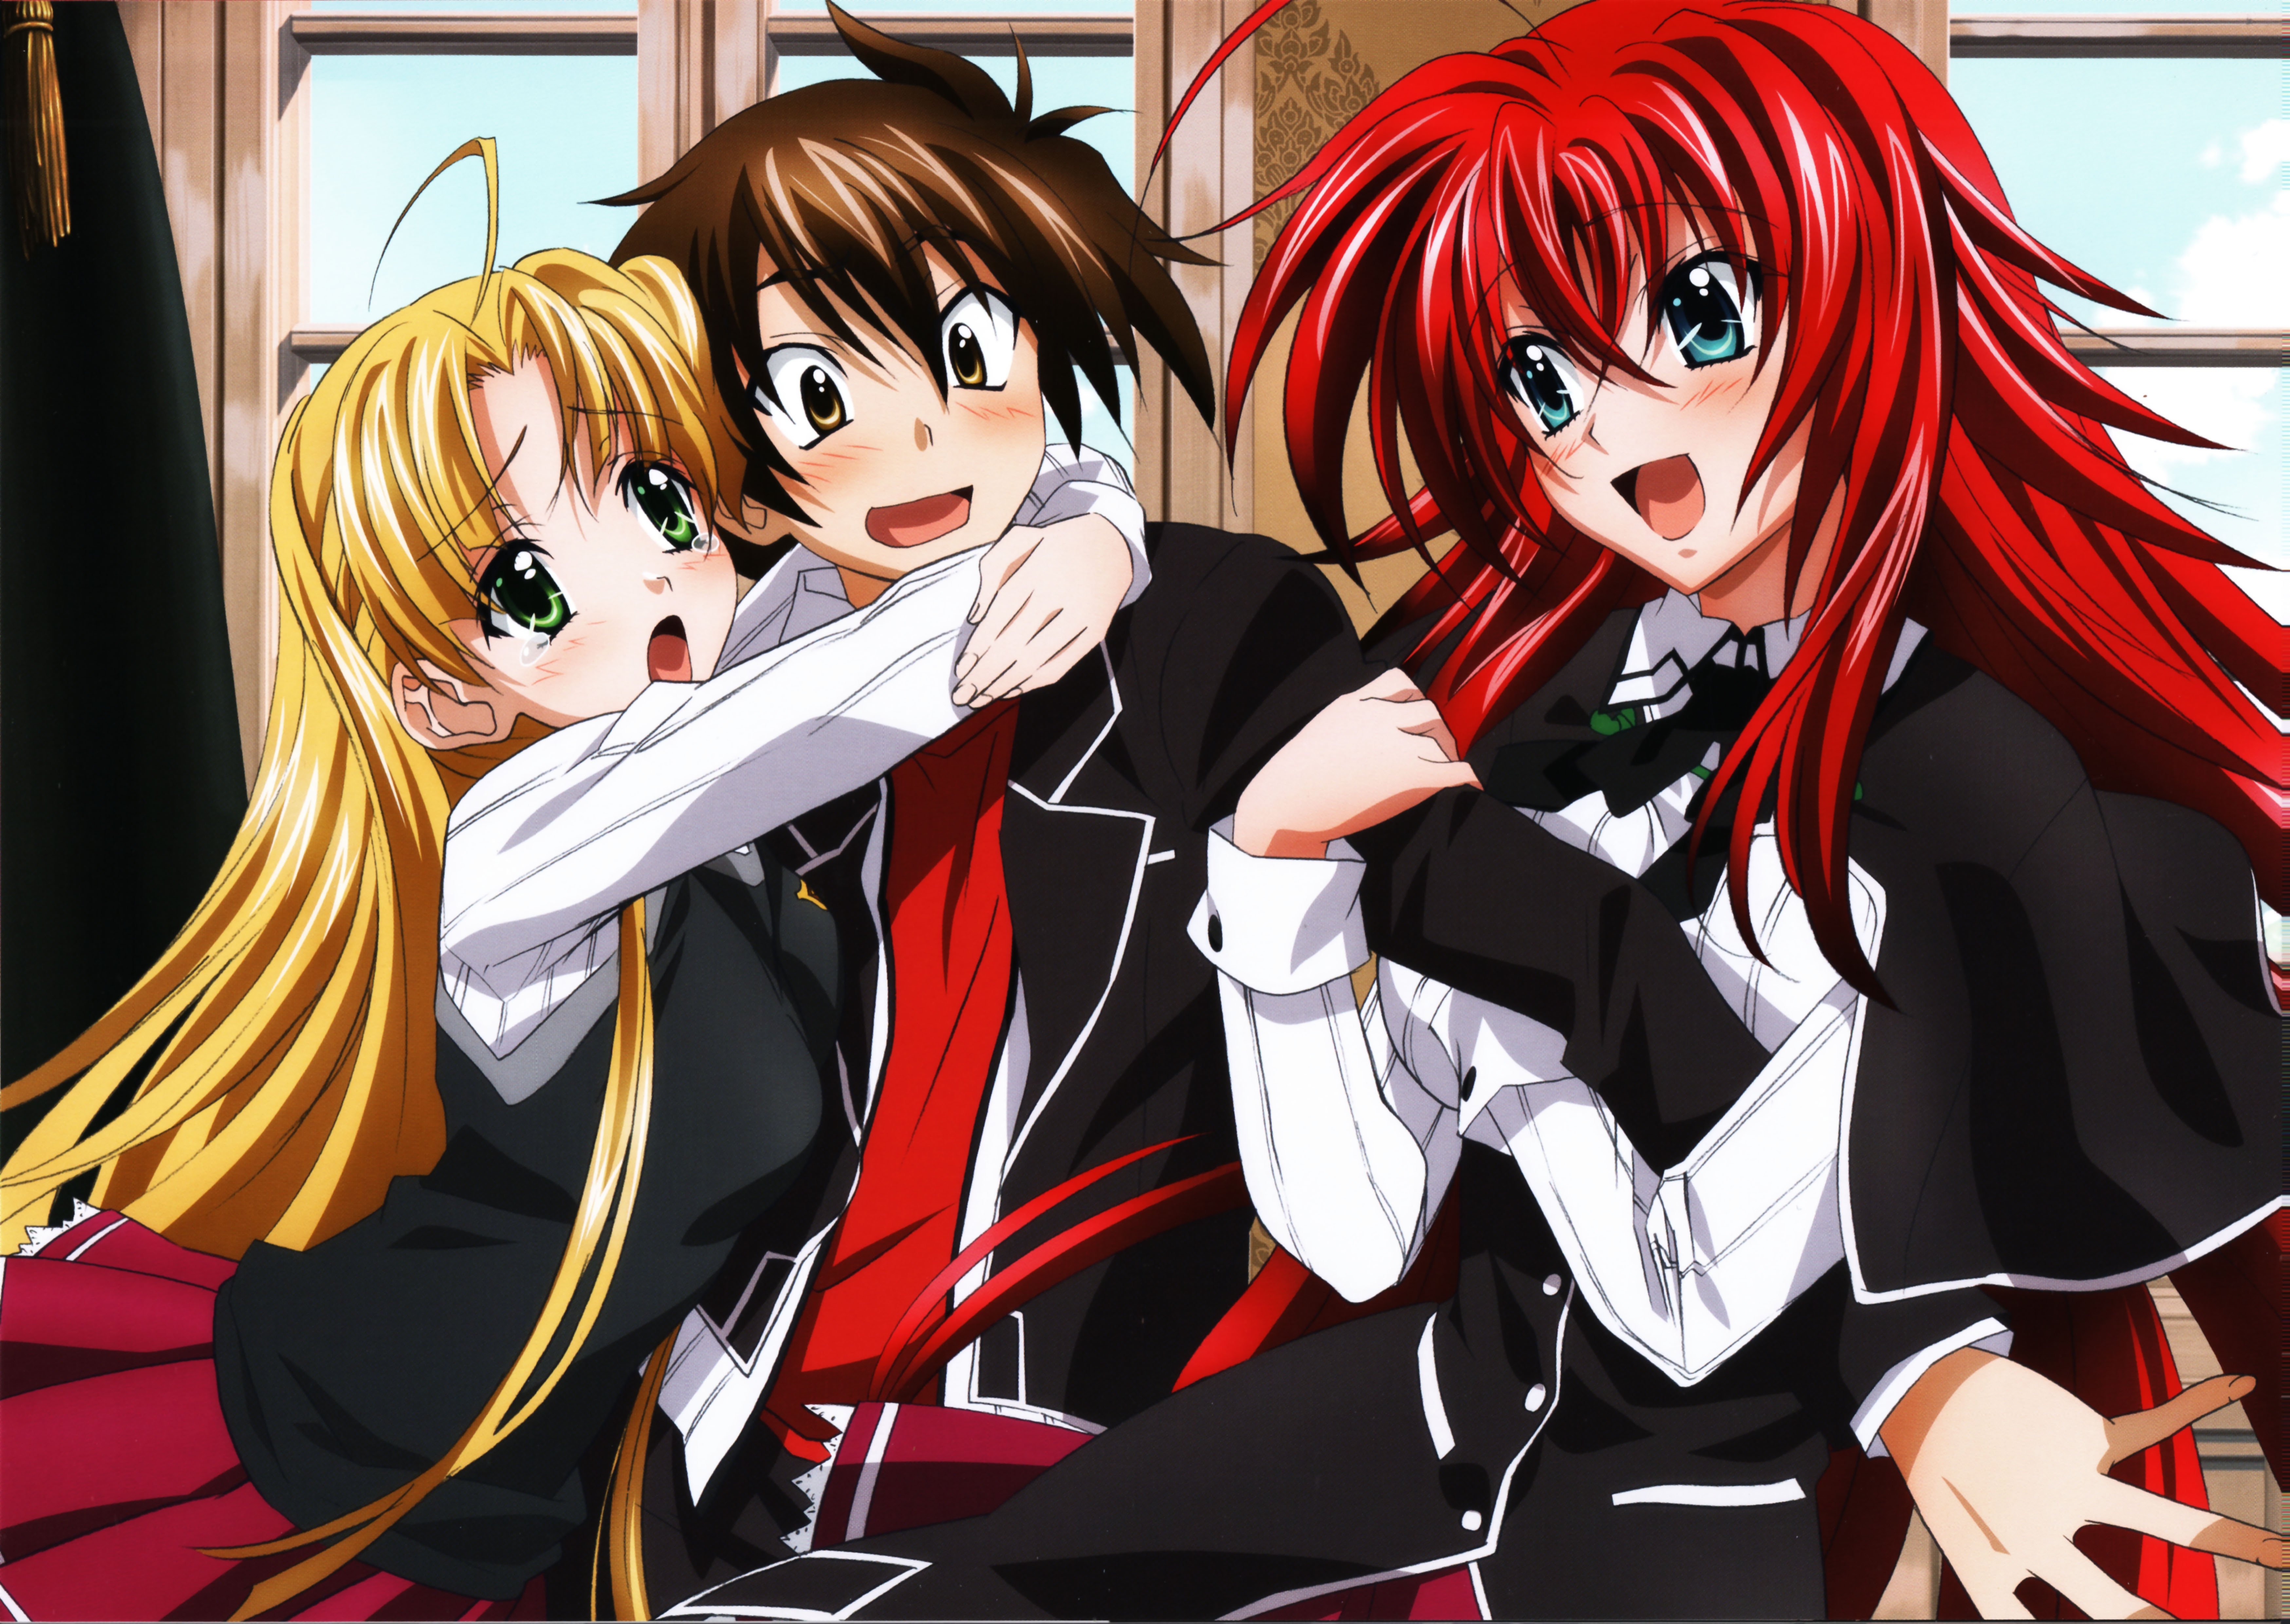 5. Rias Gremory from High School DxD - wide 9